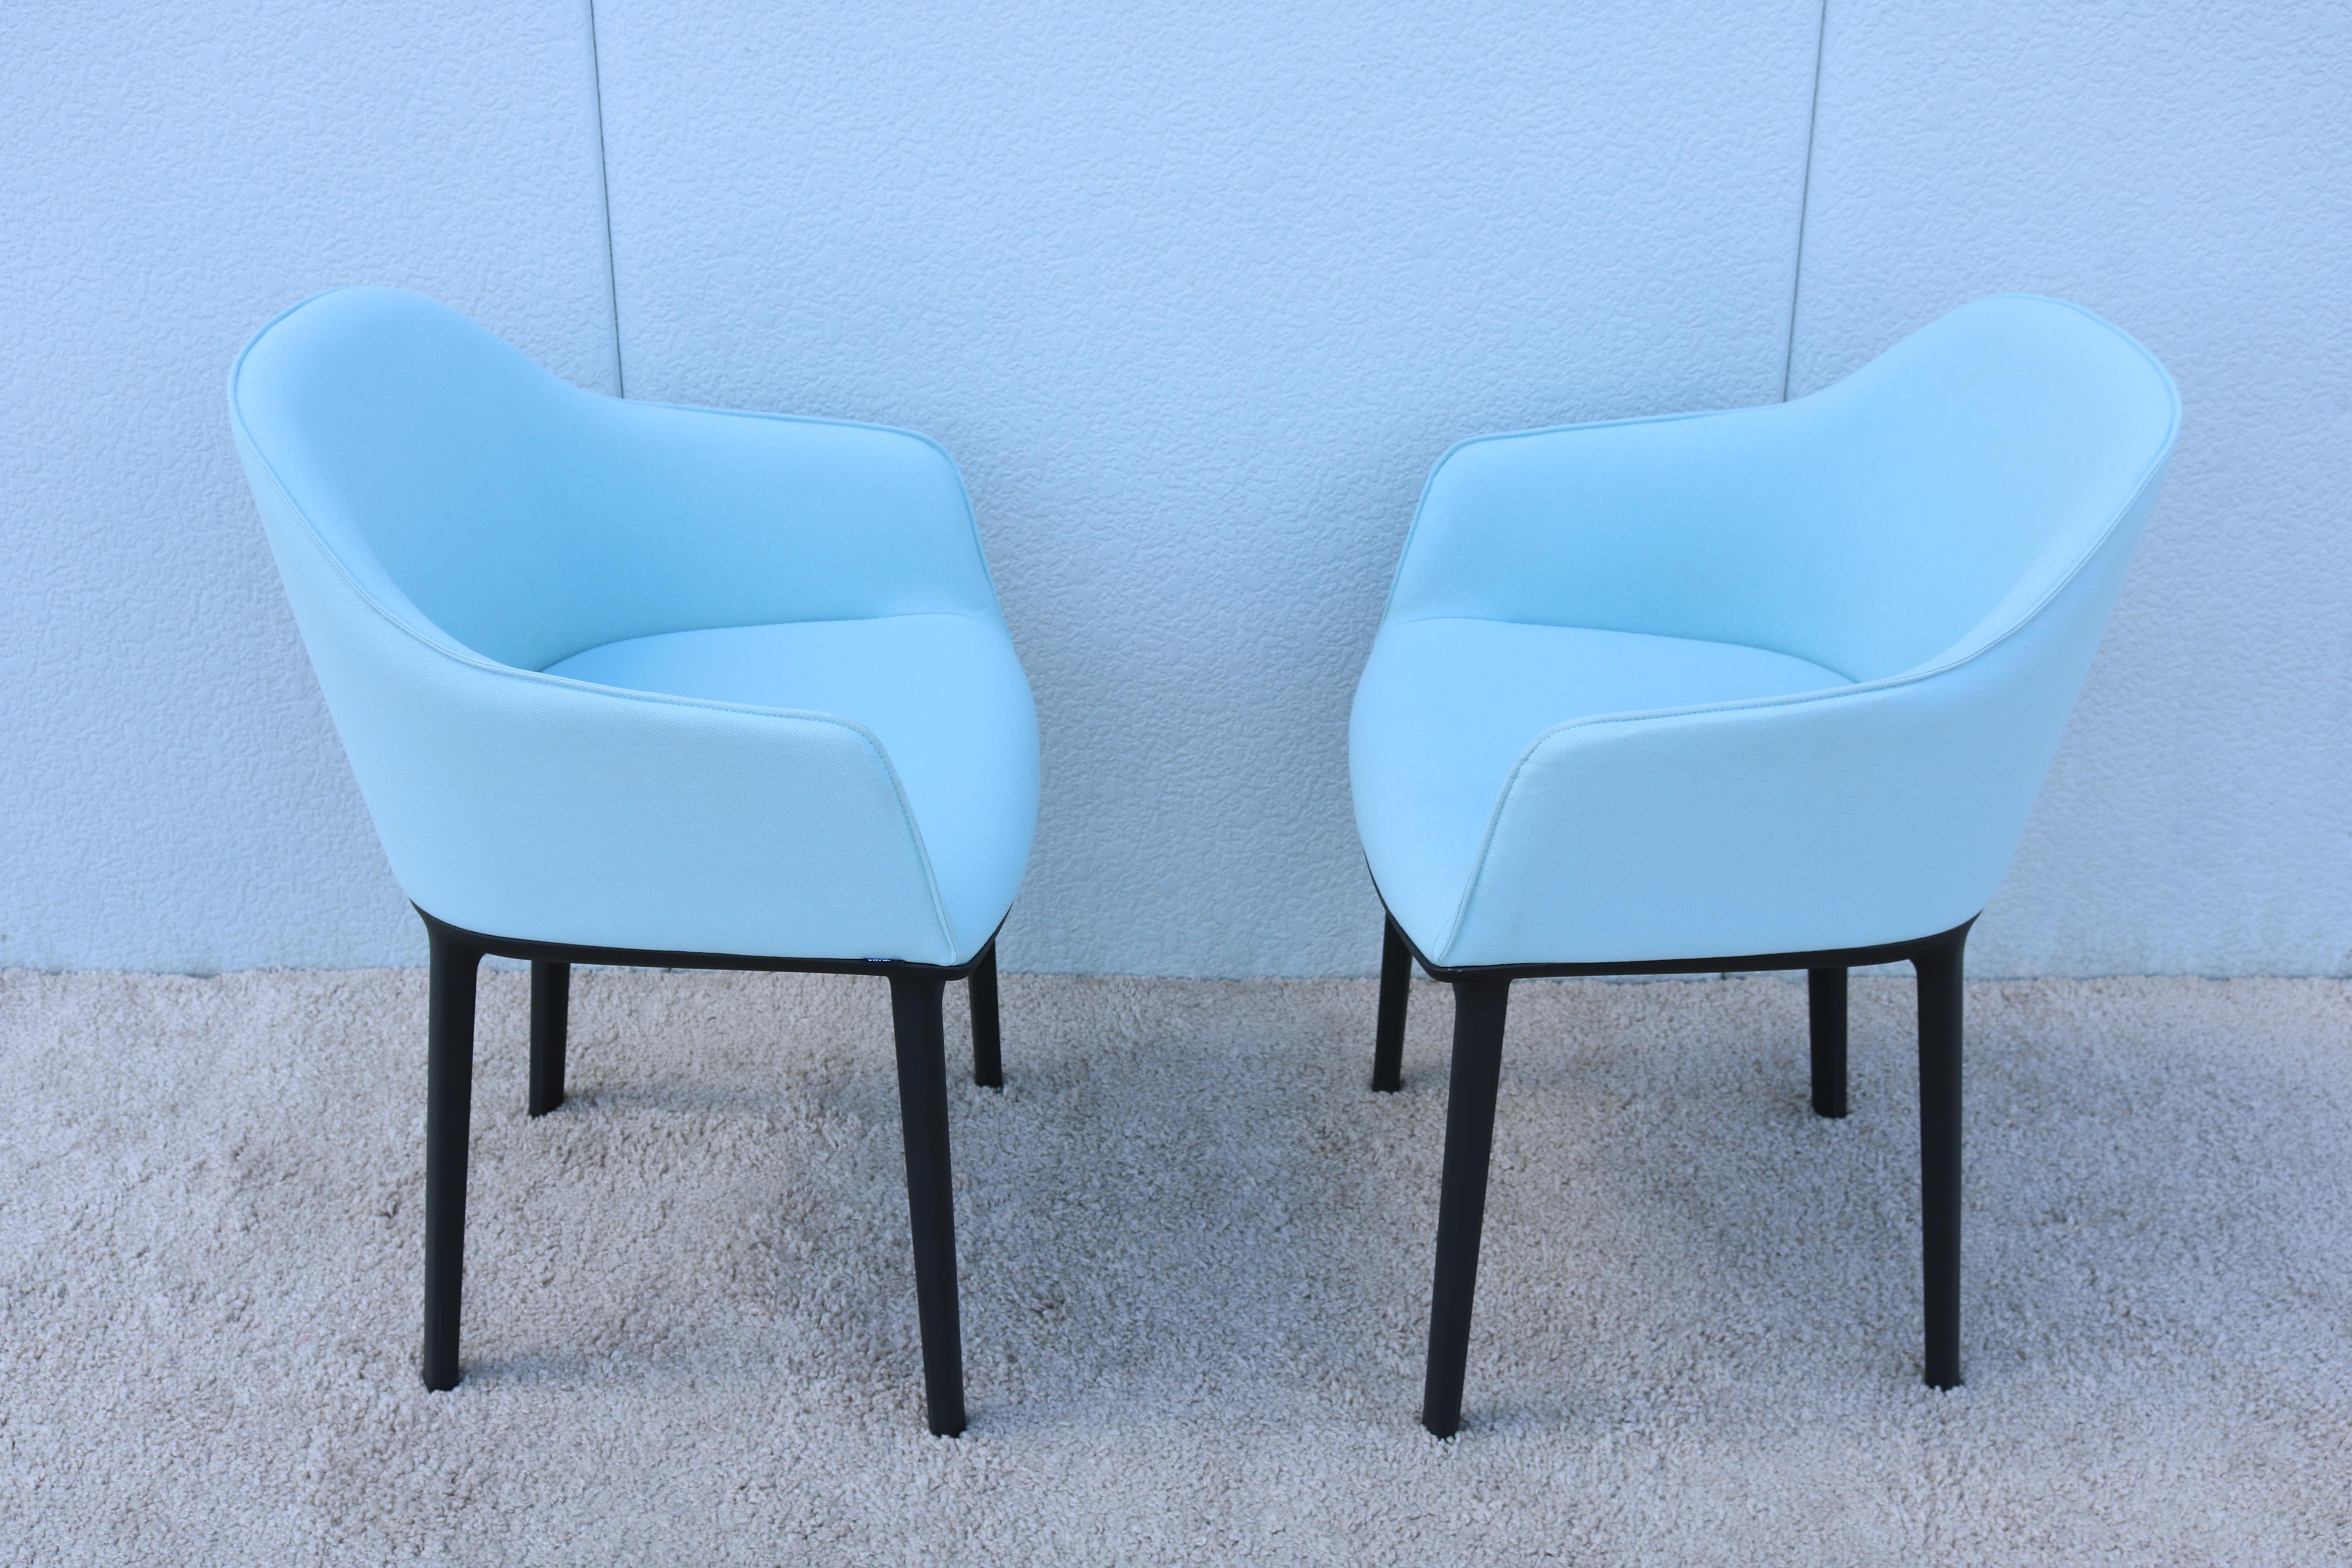 Modern Ronan and Erwan Bouroullec for Vitra Ice Blue Softshell Chairs, a Pair For Sale 5